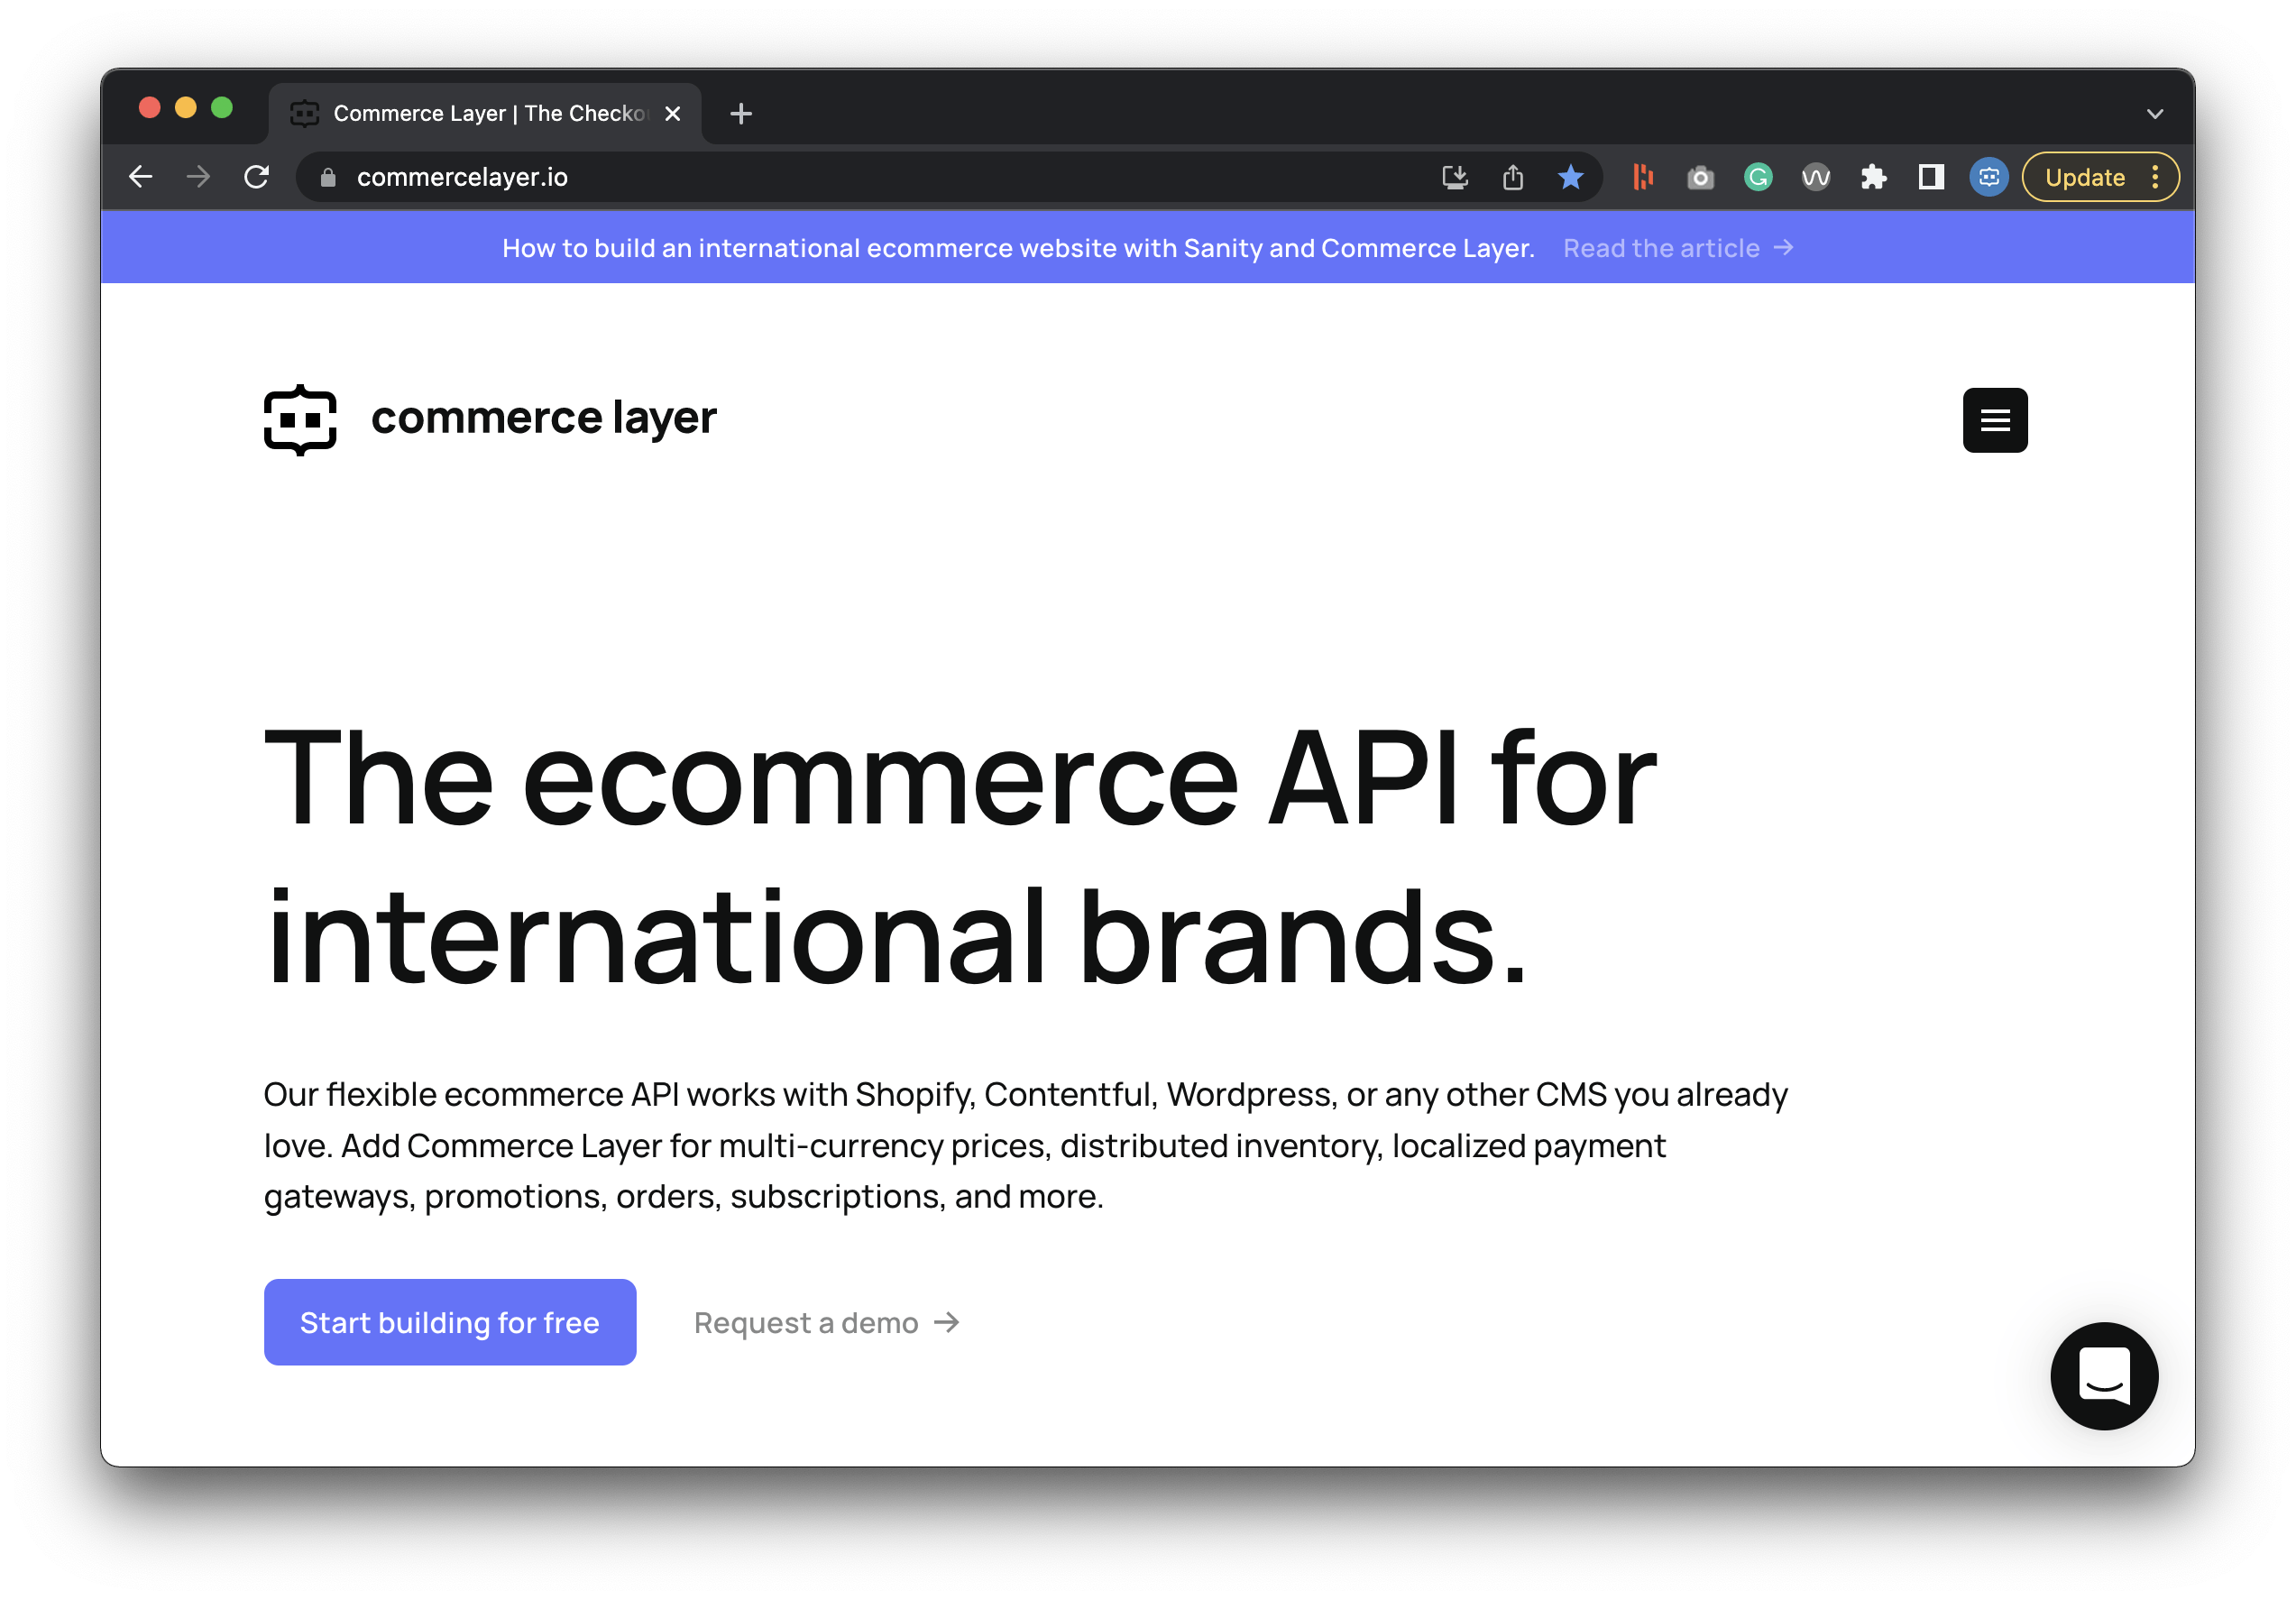 A screenshot of Commerce Layer's website homepage